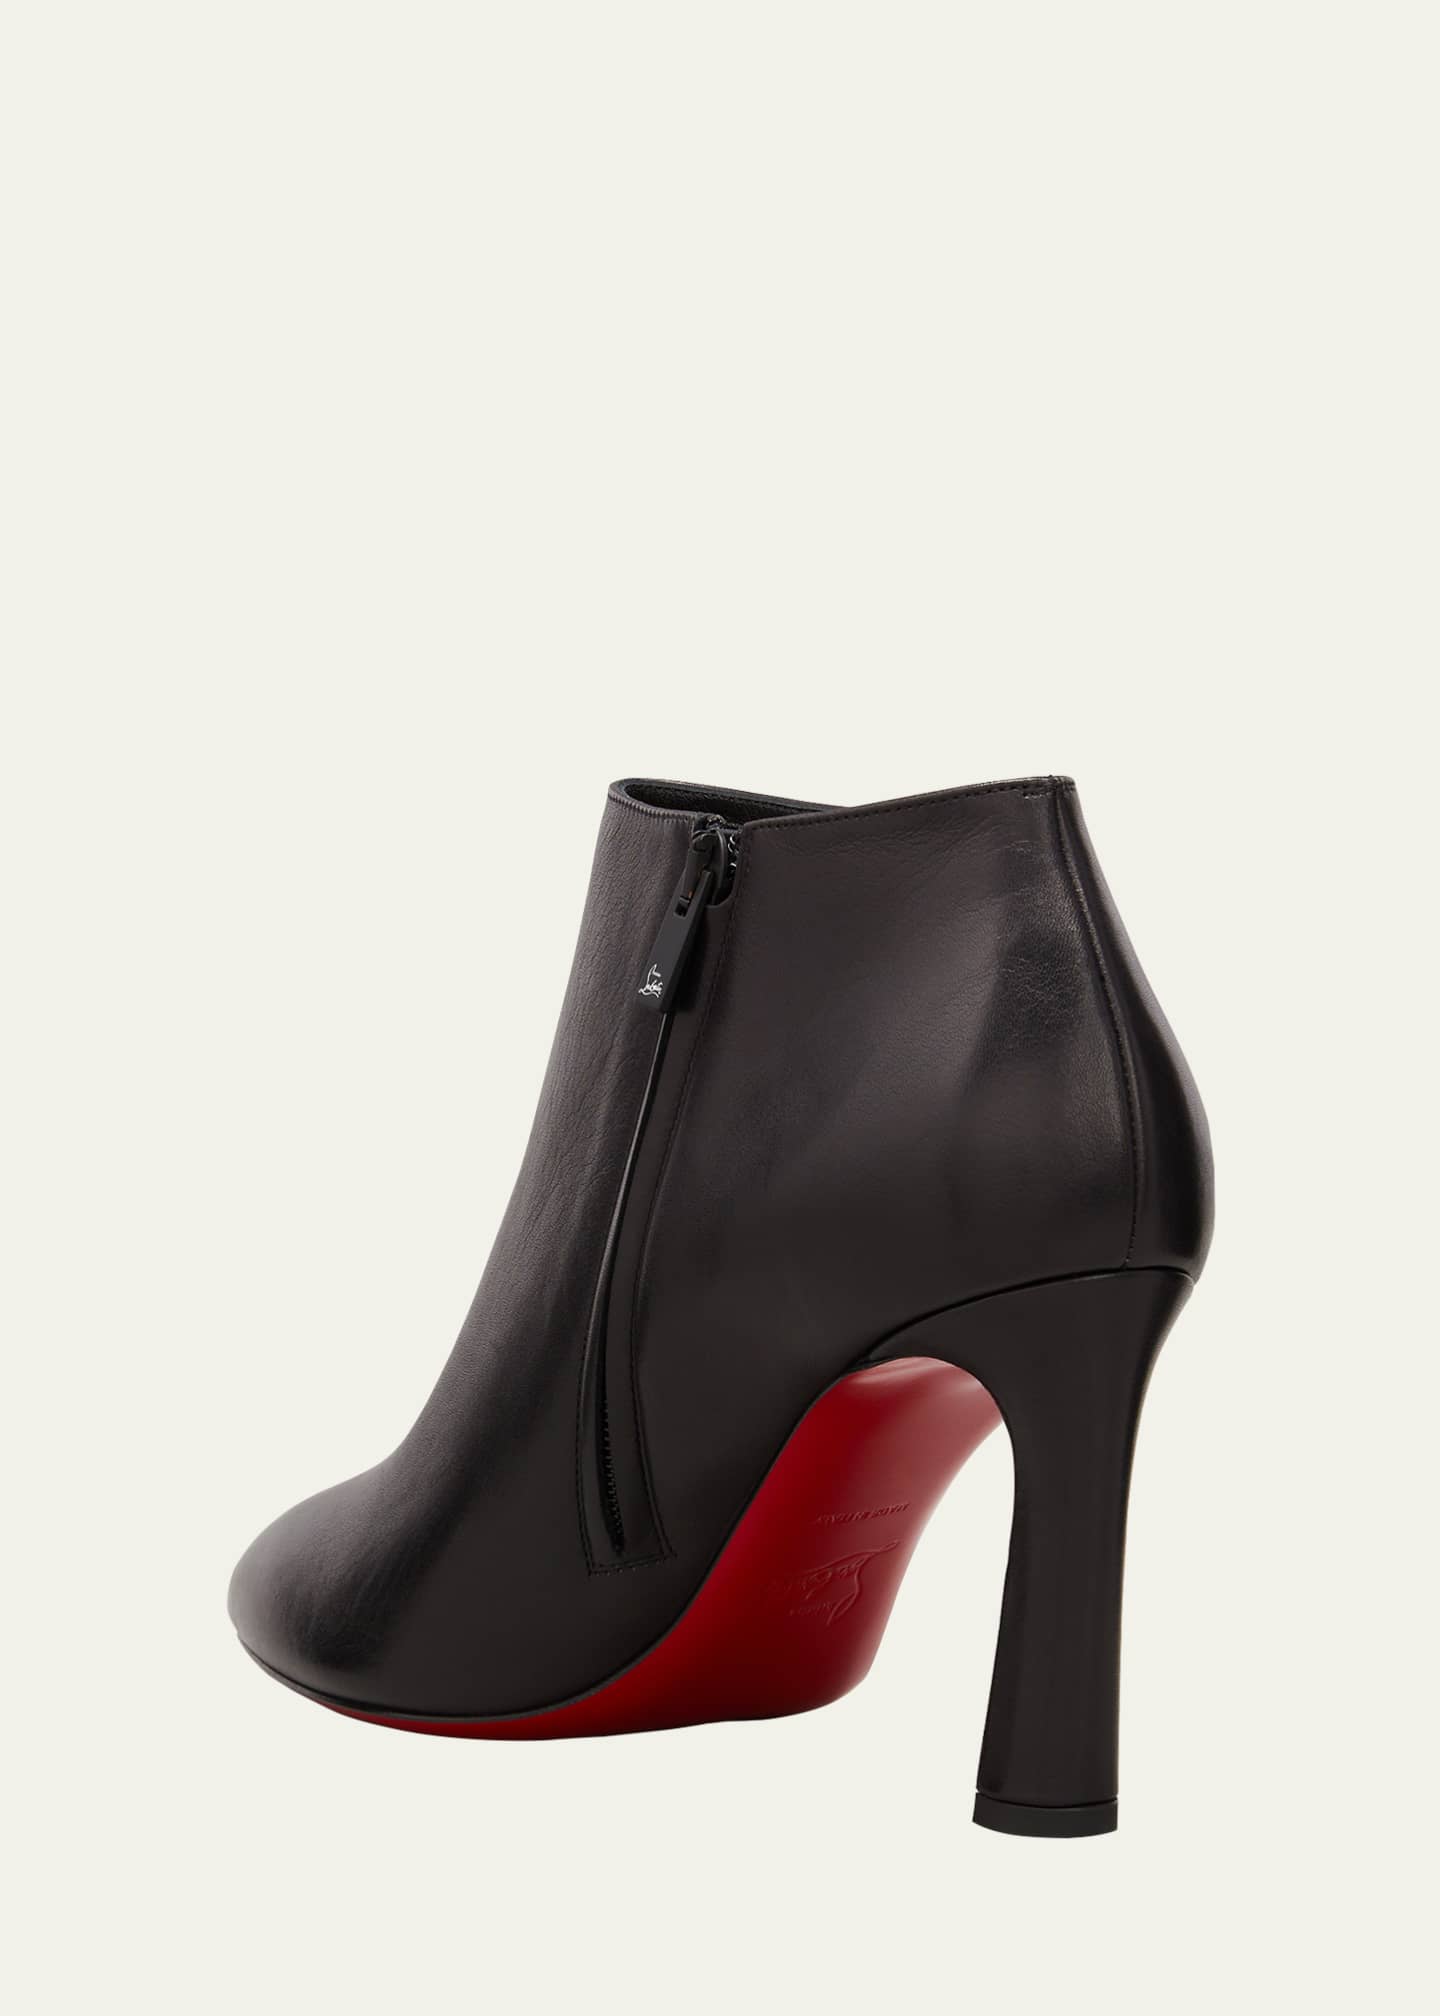 Womens Christian Louboutin Boots, Red Sole Boots